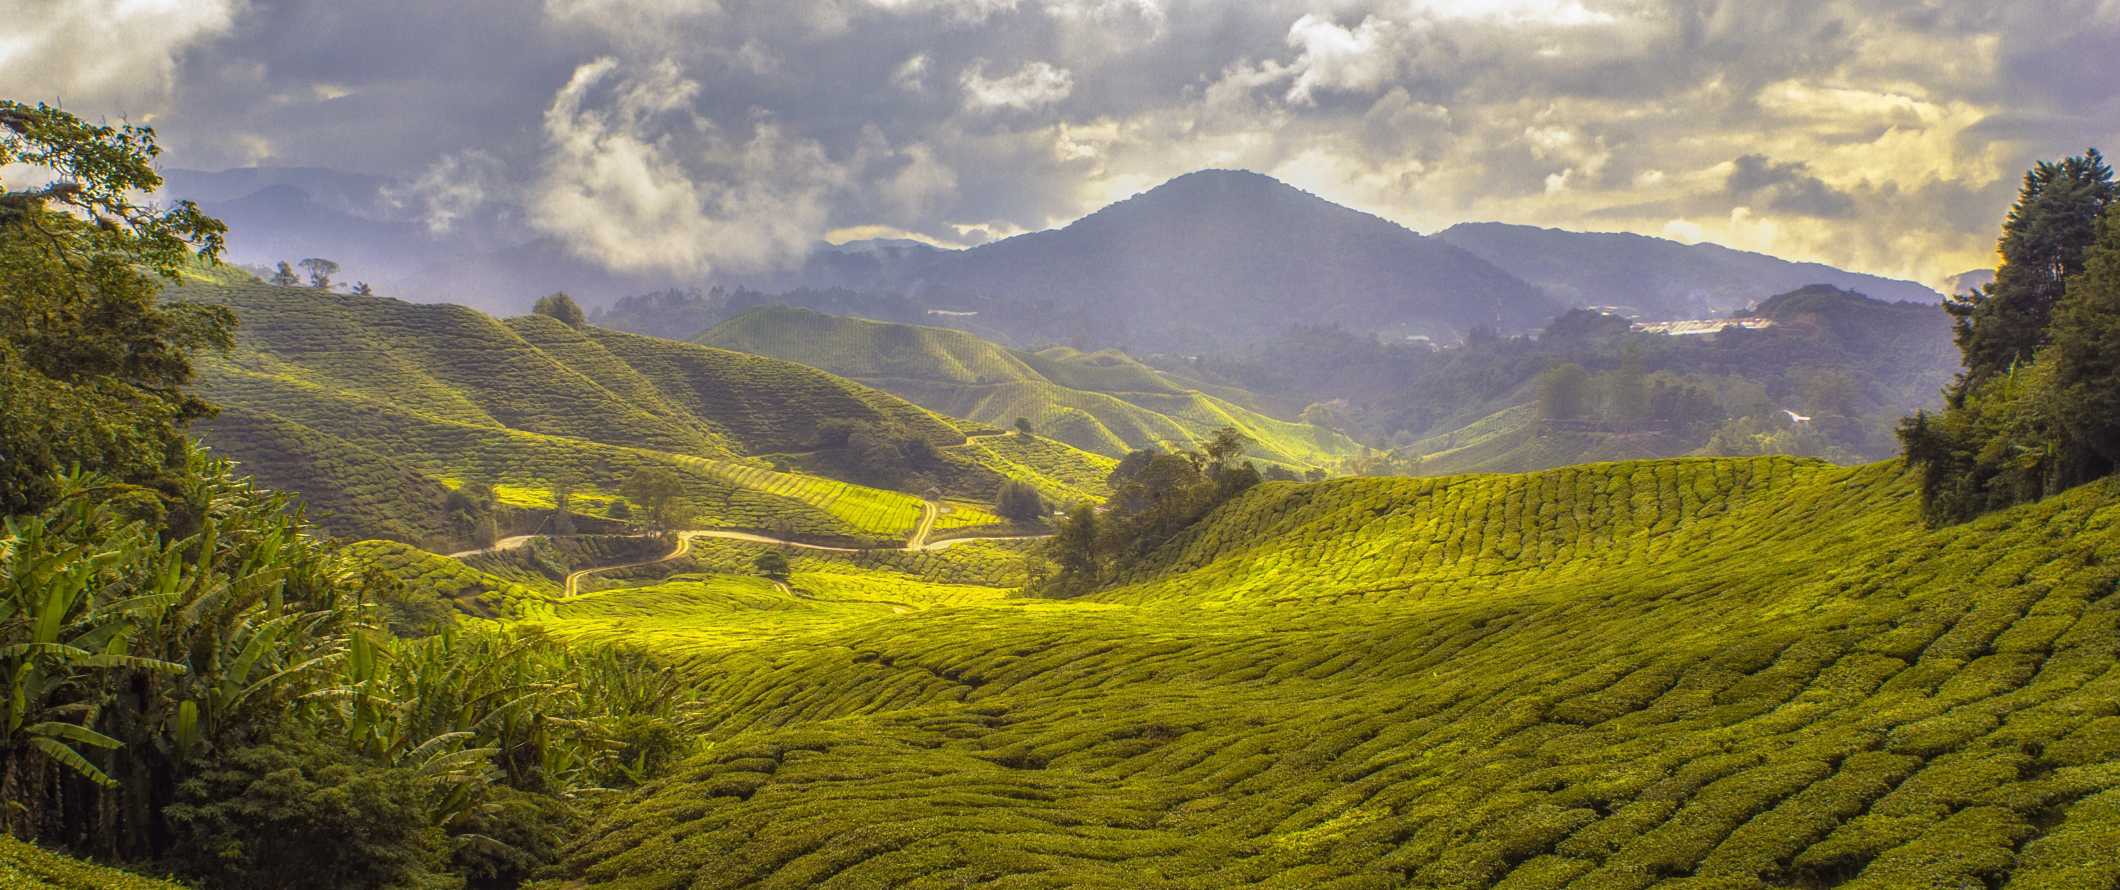 Stunning view of the Cameron Highlands, Malaysia and its lush, rolling green hills